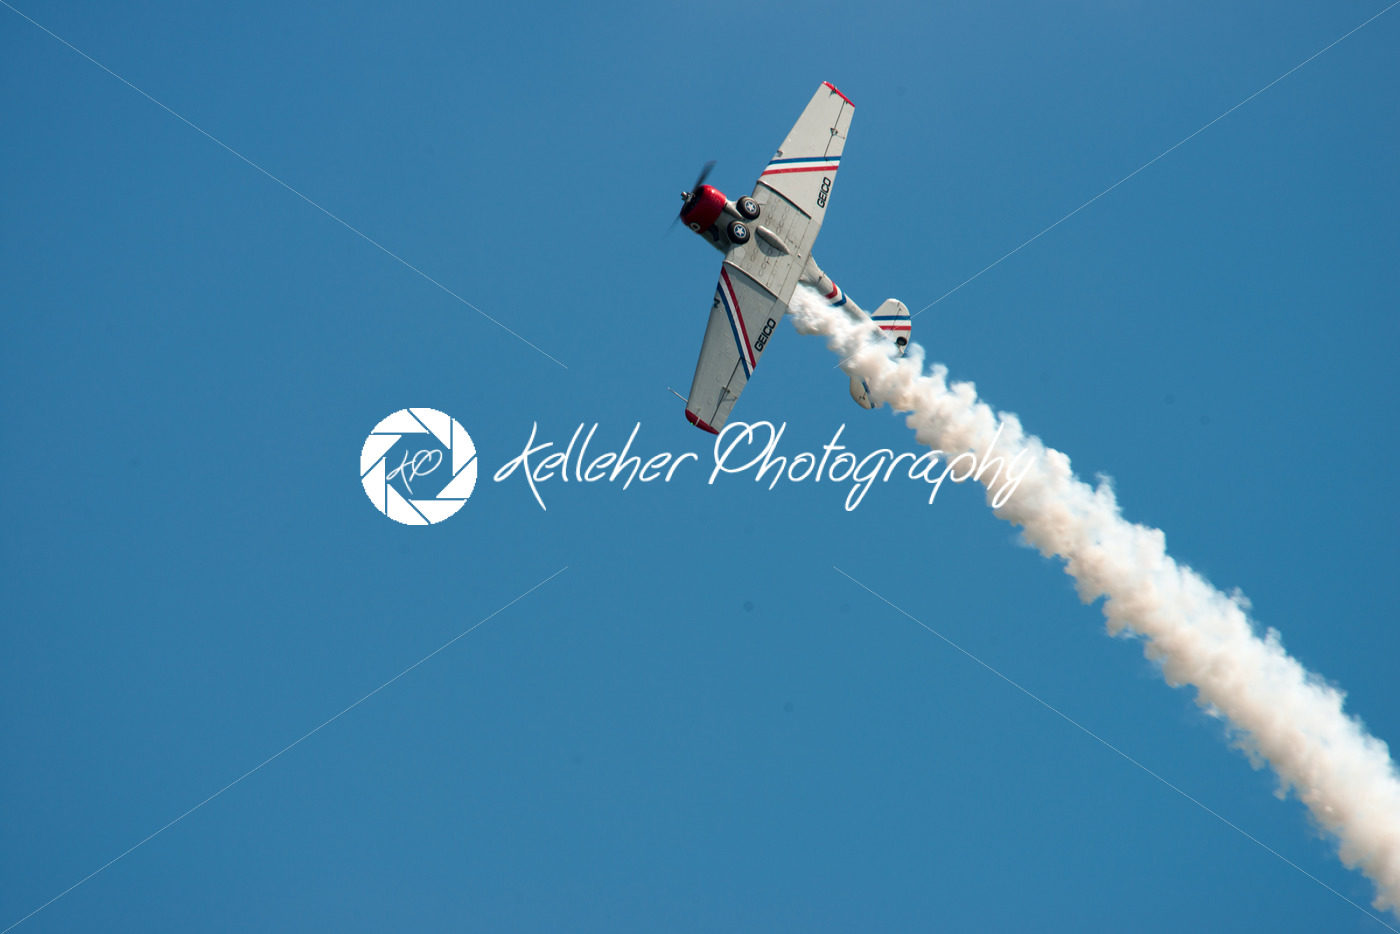 ATLANTIC CITY, NJ – AUGUST 17: Geicko Skytypers performing at the Annual Atlantic City Air Show on August 17, 2016 - Kelleher Photography Store